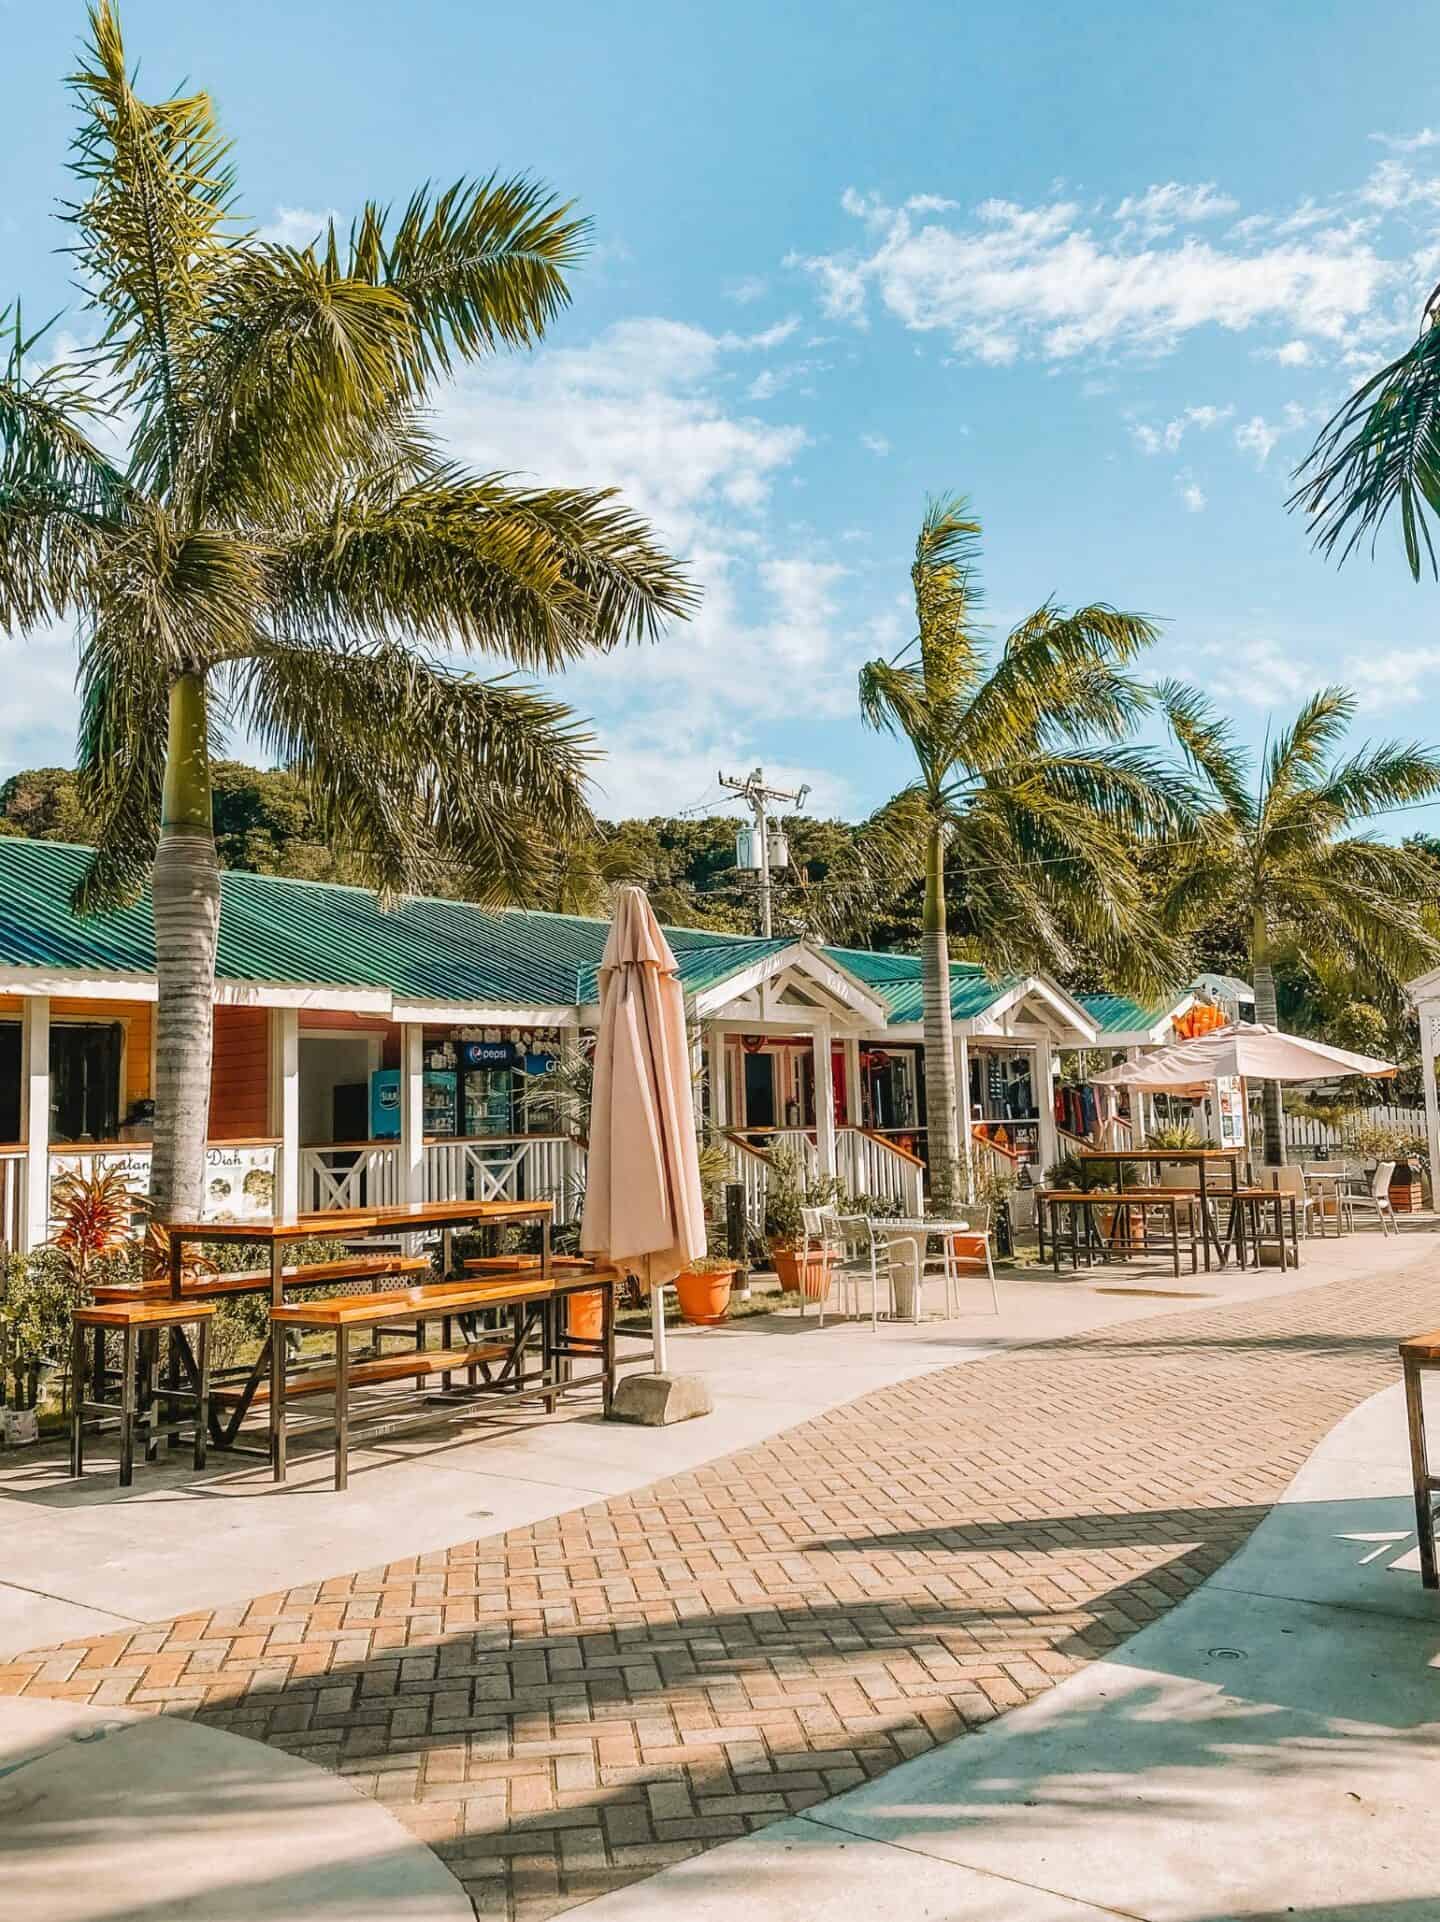 La Placita is the best place to find affordable restaurants in Roatan West Bay